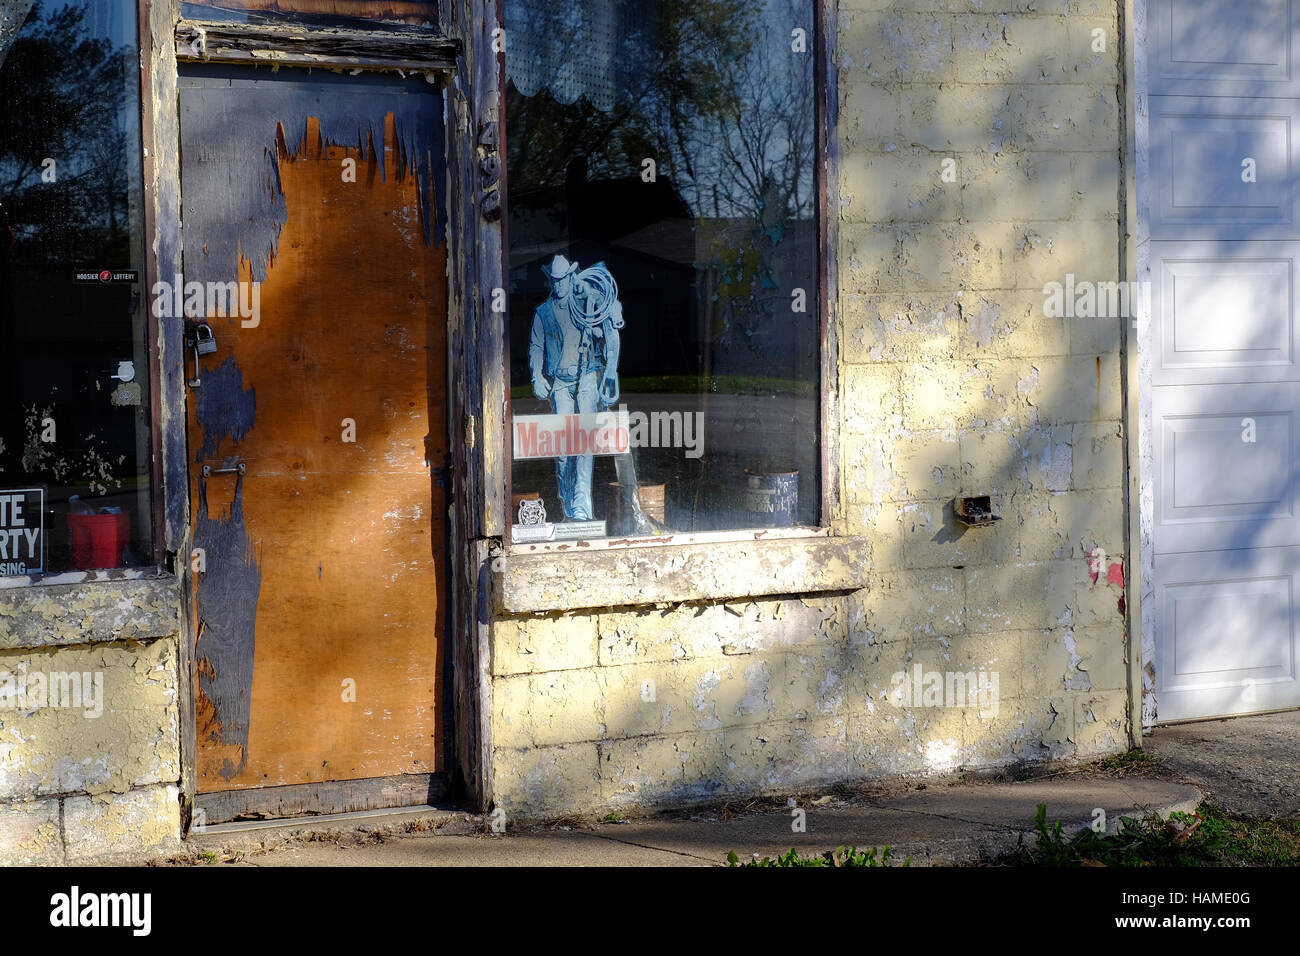 The Marlboro Man is fading but still around in this abandoned gas station in Jefferson, Indiana Stock Photo